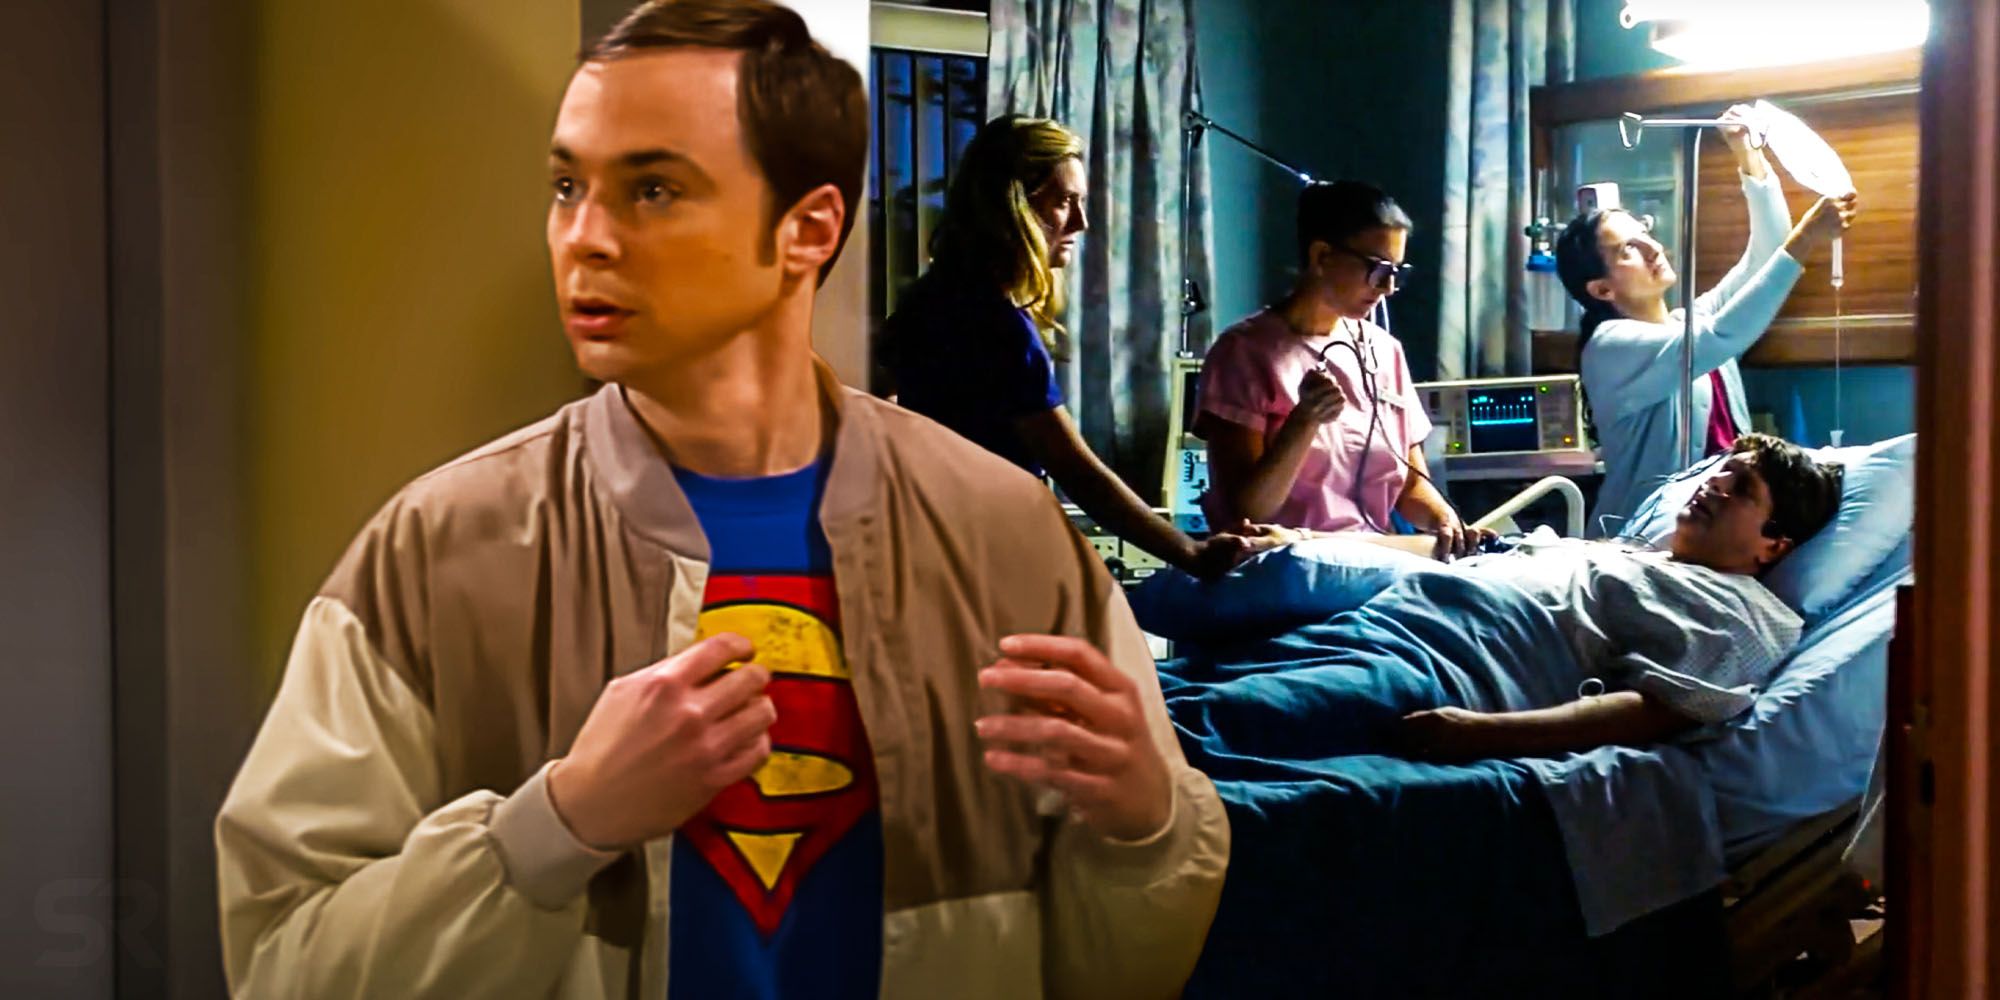 Sheldons fear of hospitals big bang theory Young sheldon george heart attack